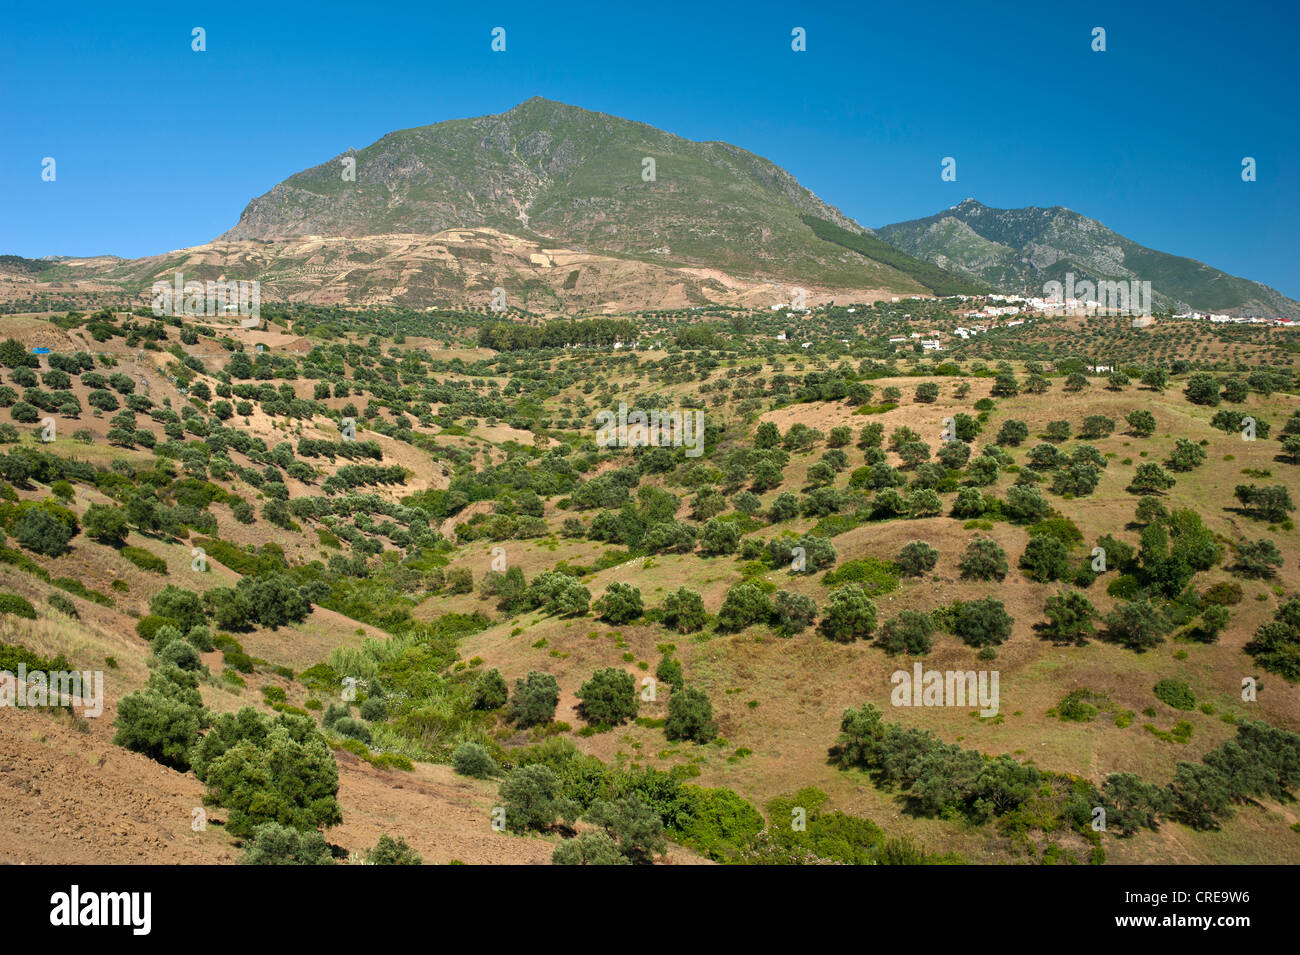 Olive trees and the city of Chefchaouen, situated on a hillside in the Rif Mountains, northern Morocco, Africa Stock Photo